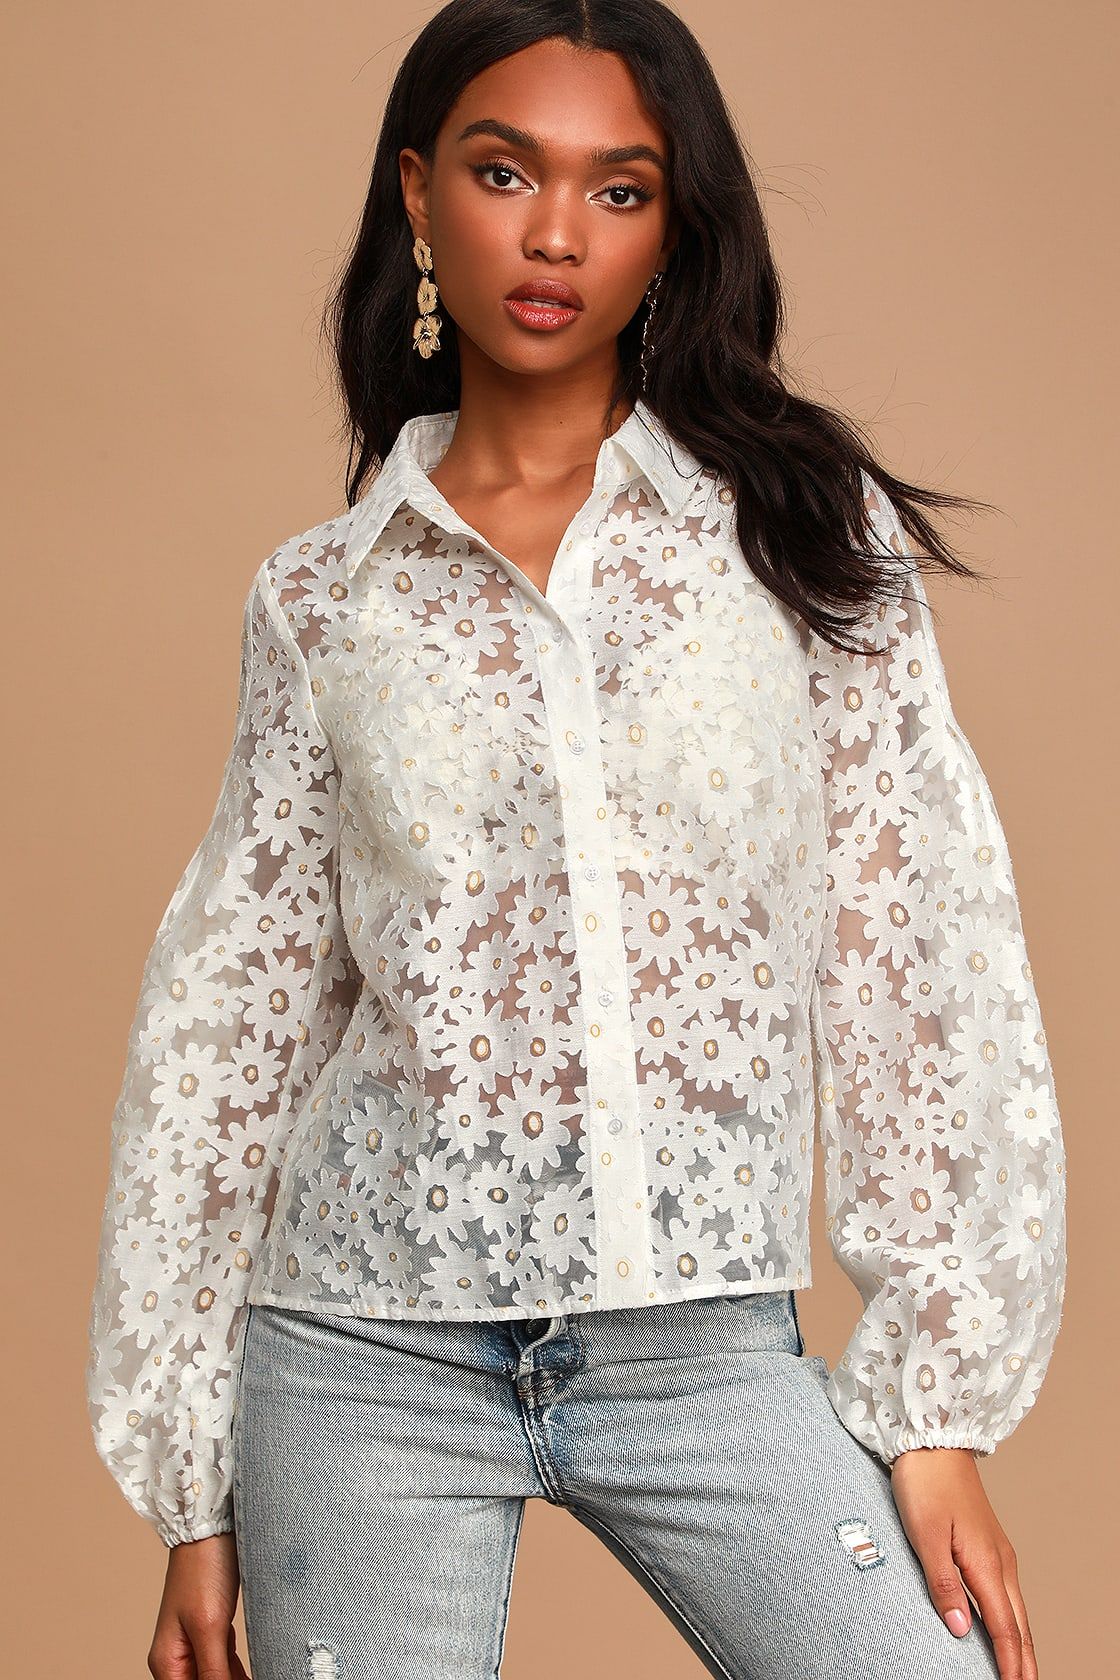 Happiness Blooms White Sheer Organza Floral Lace Button-Up Top | Lulus